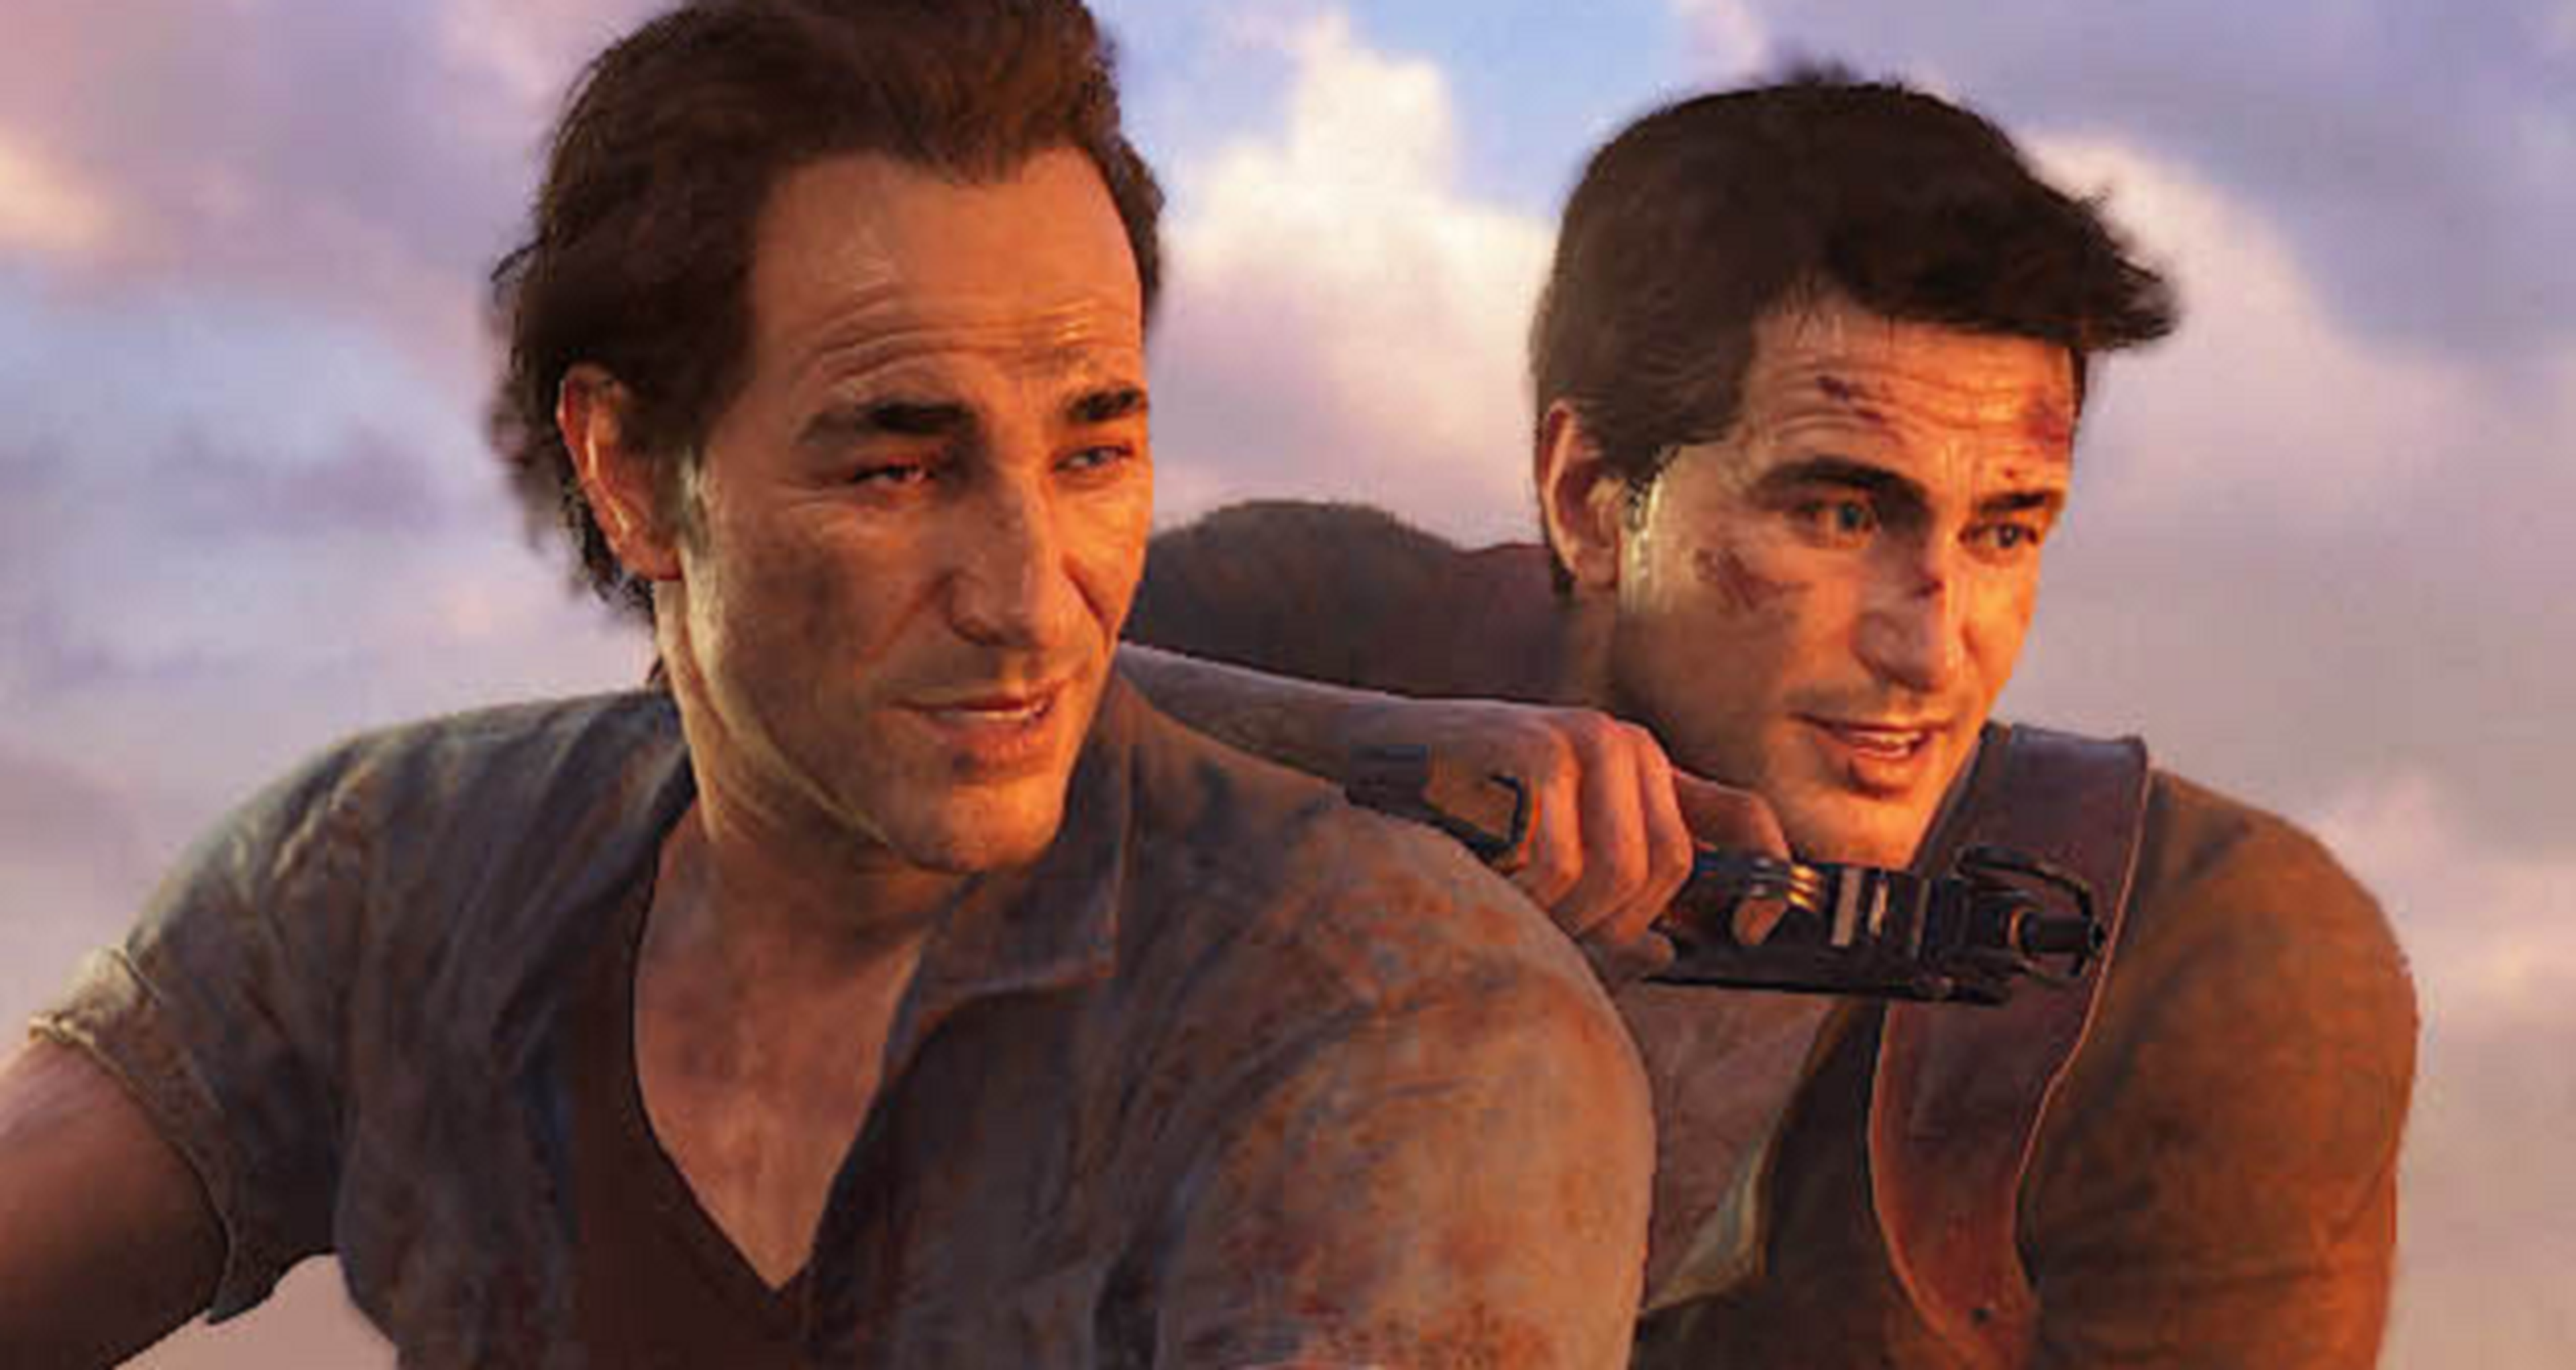 Naughty Dog promete sacar mayor rendimiento a PS4 tras Uncharted 4